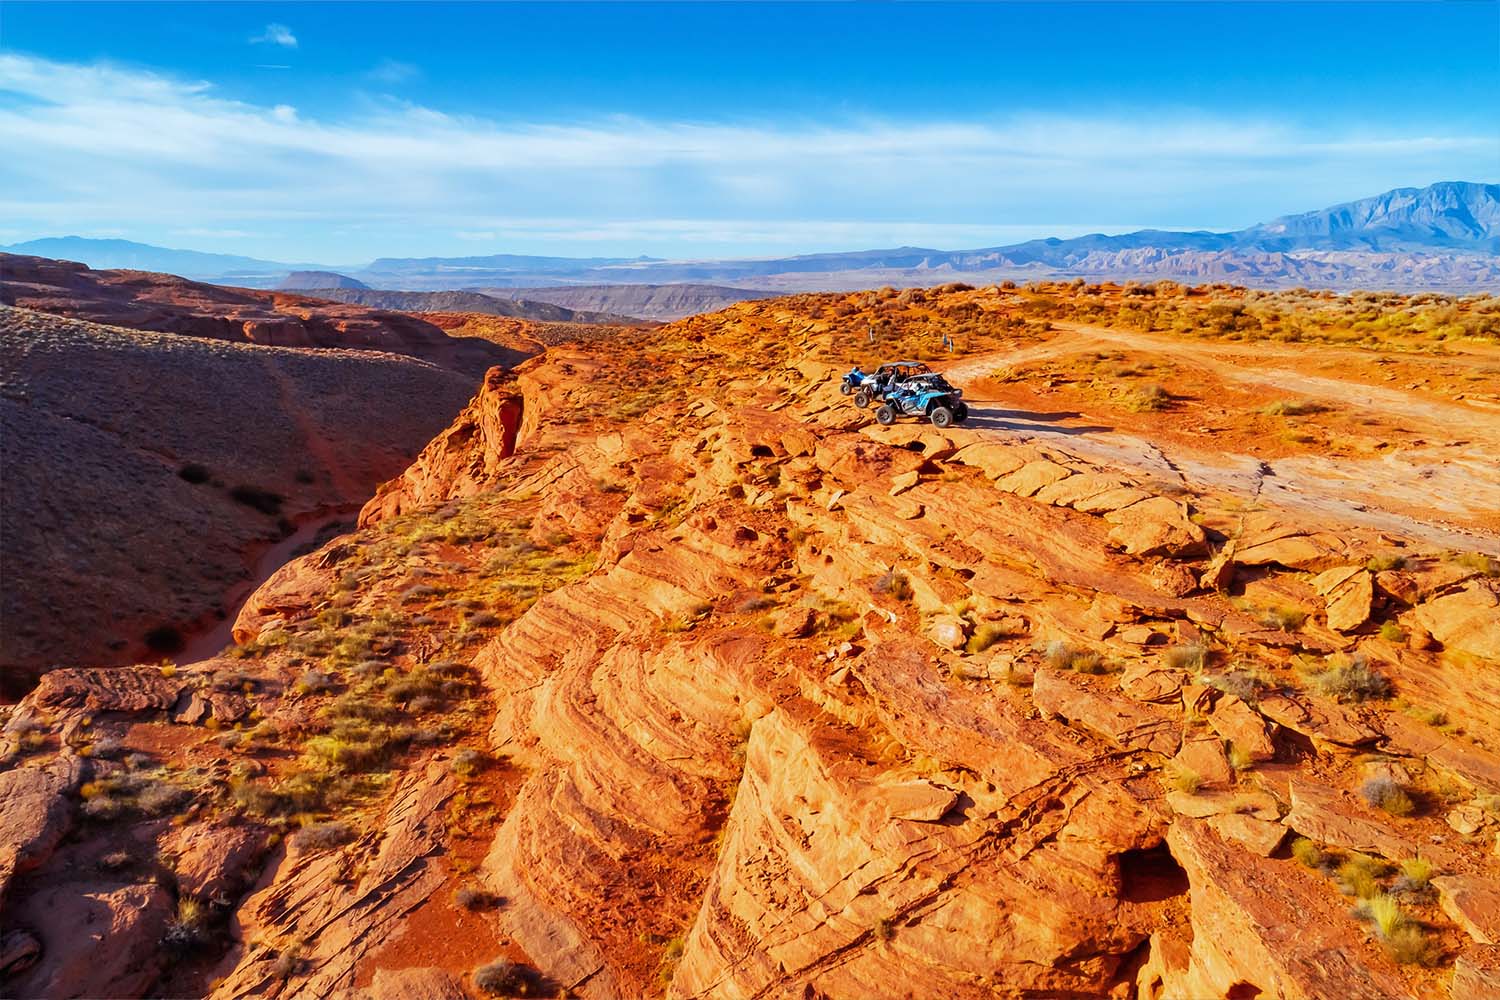 UTV Tour in the Red Cliffs National Conservation Area